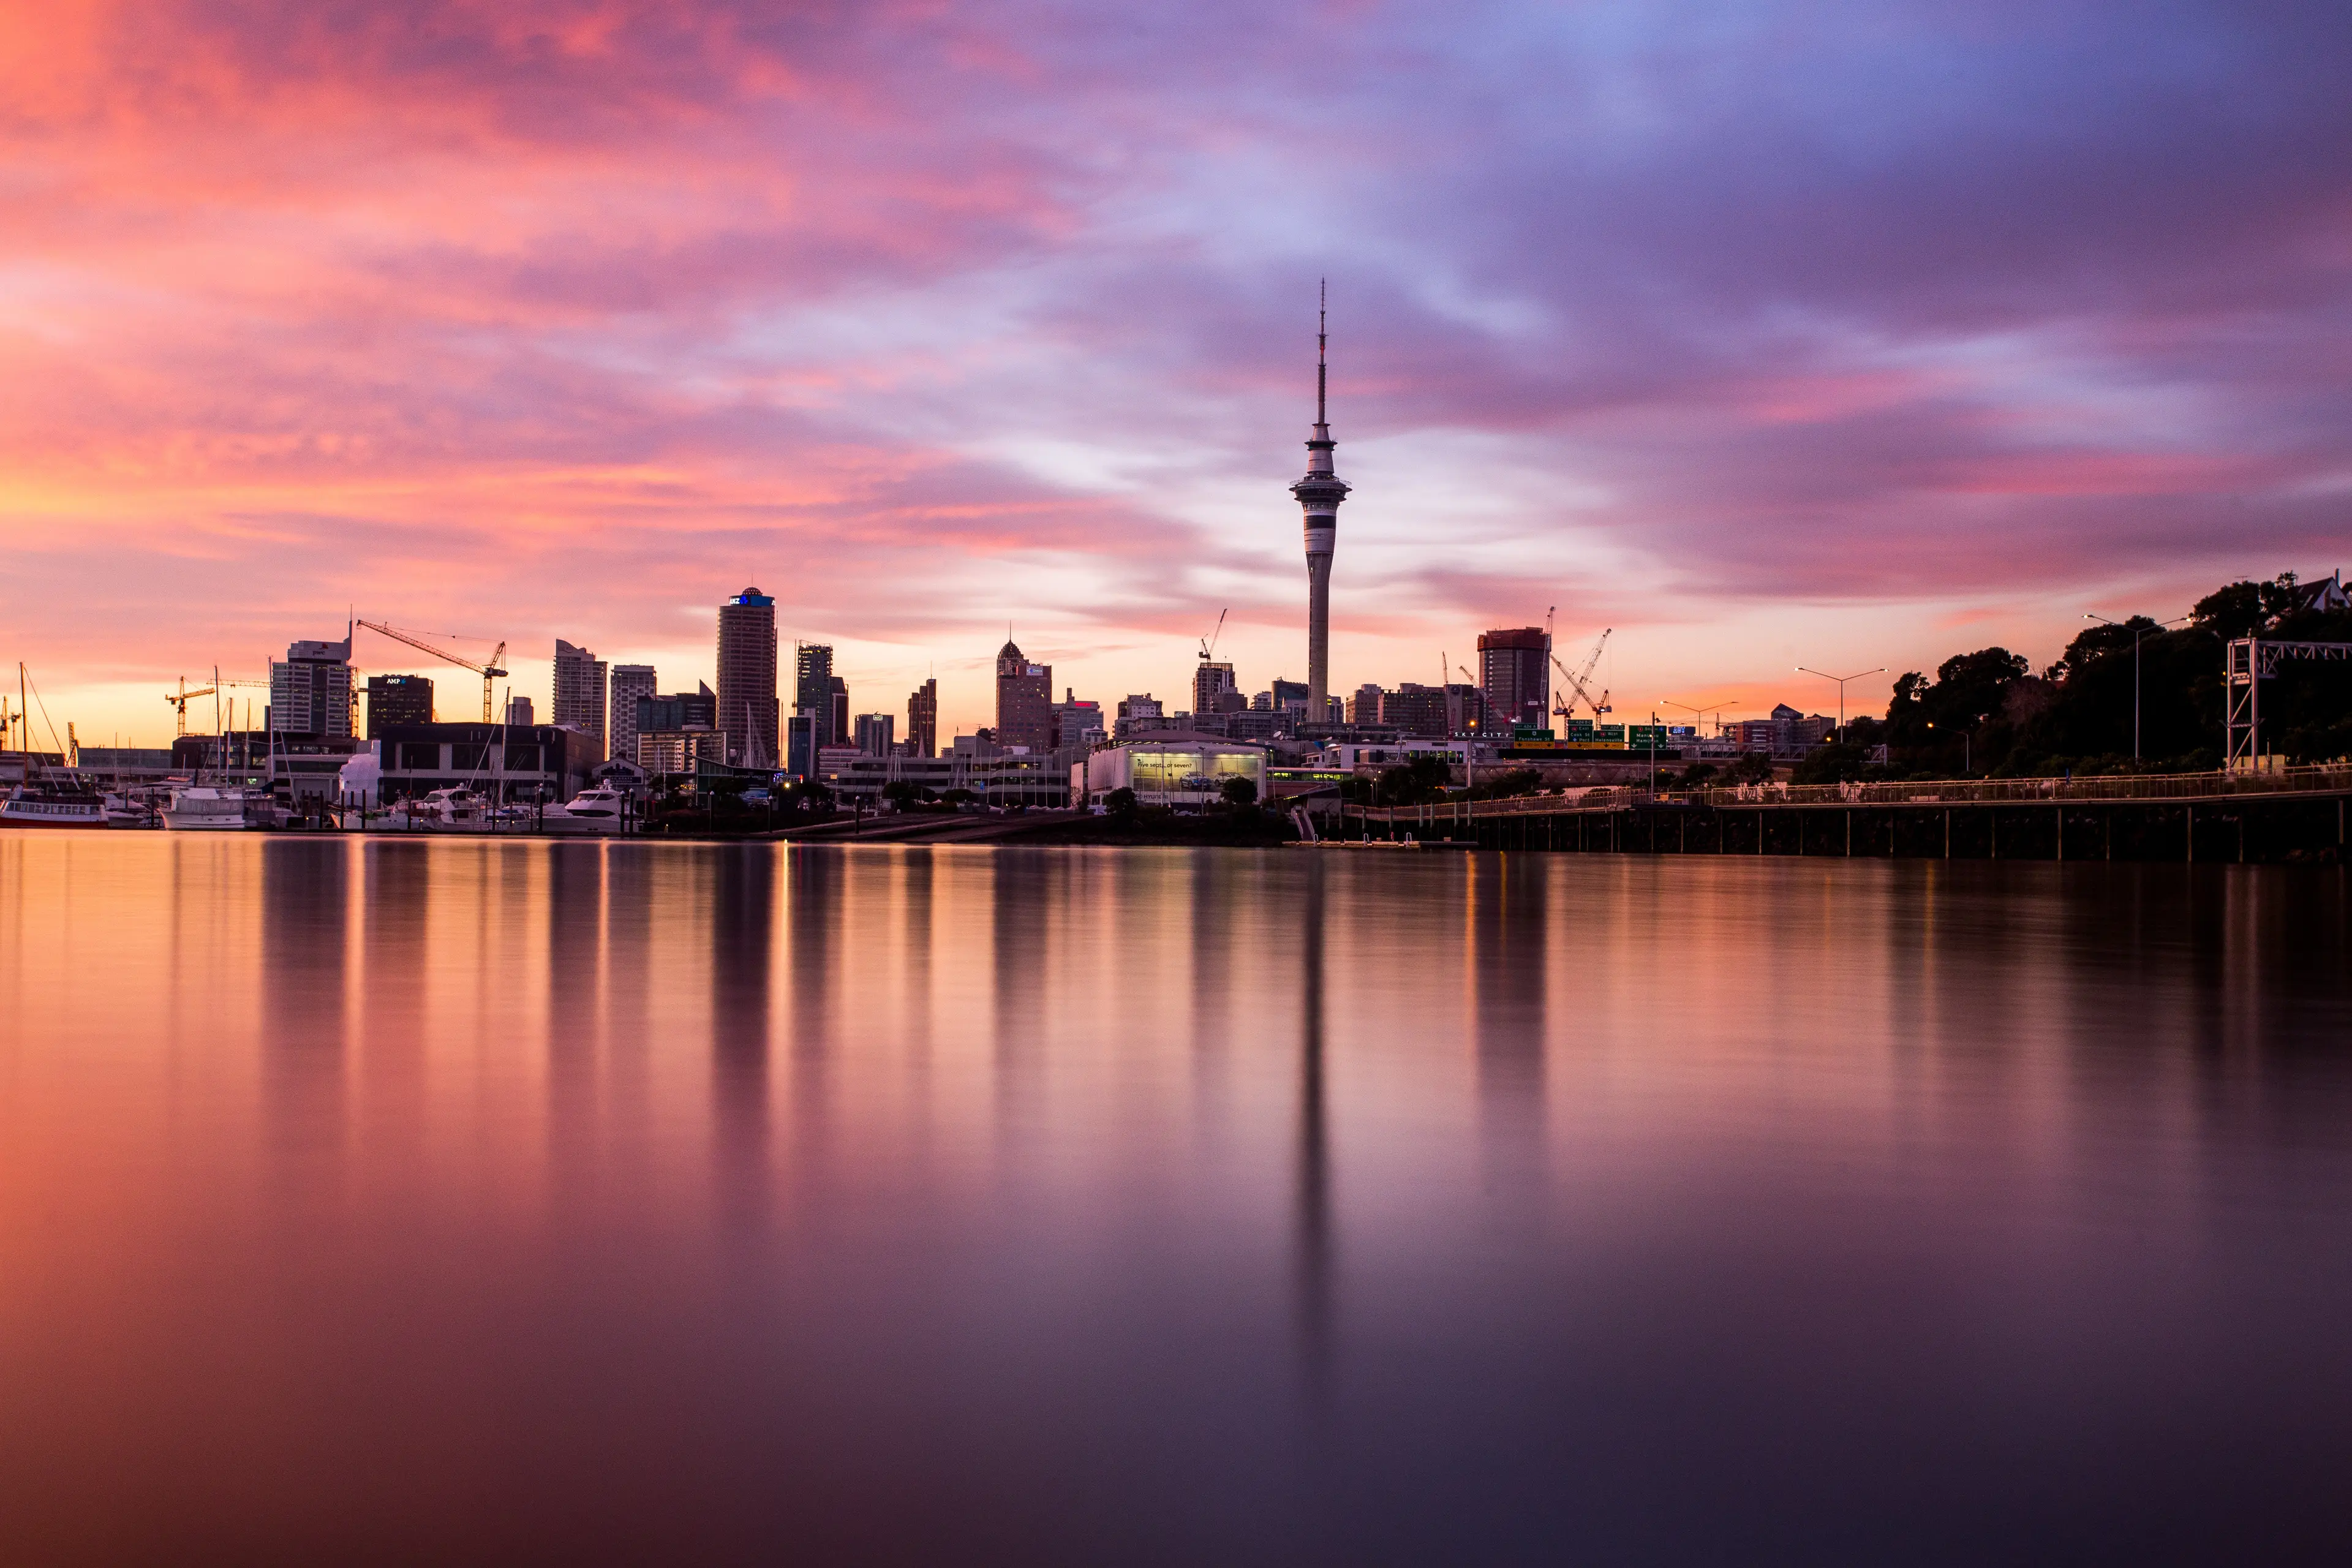 1-Day Auckland Adventure: Shopping, Dining, and Wine with Friends